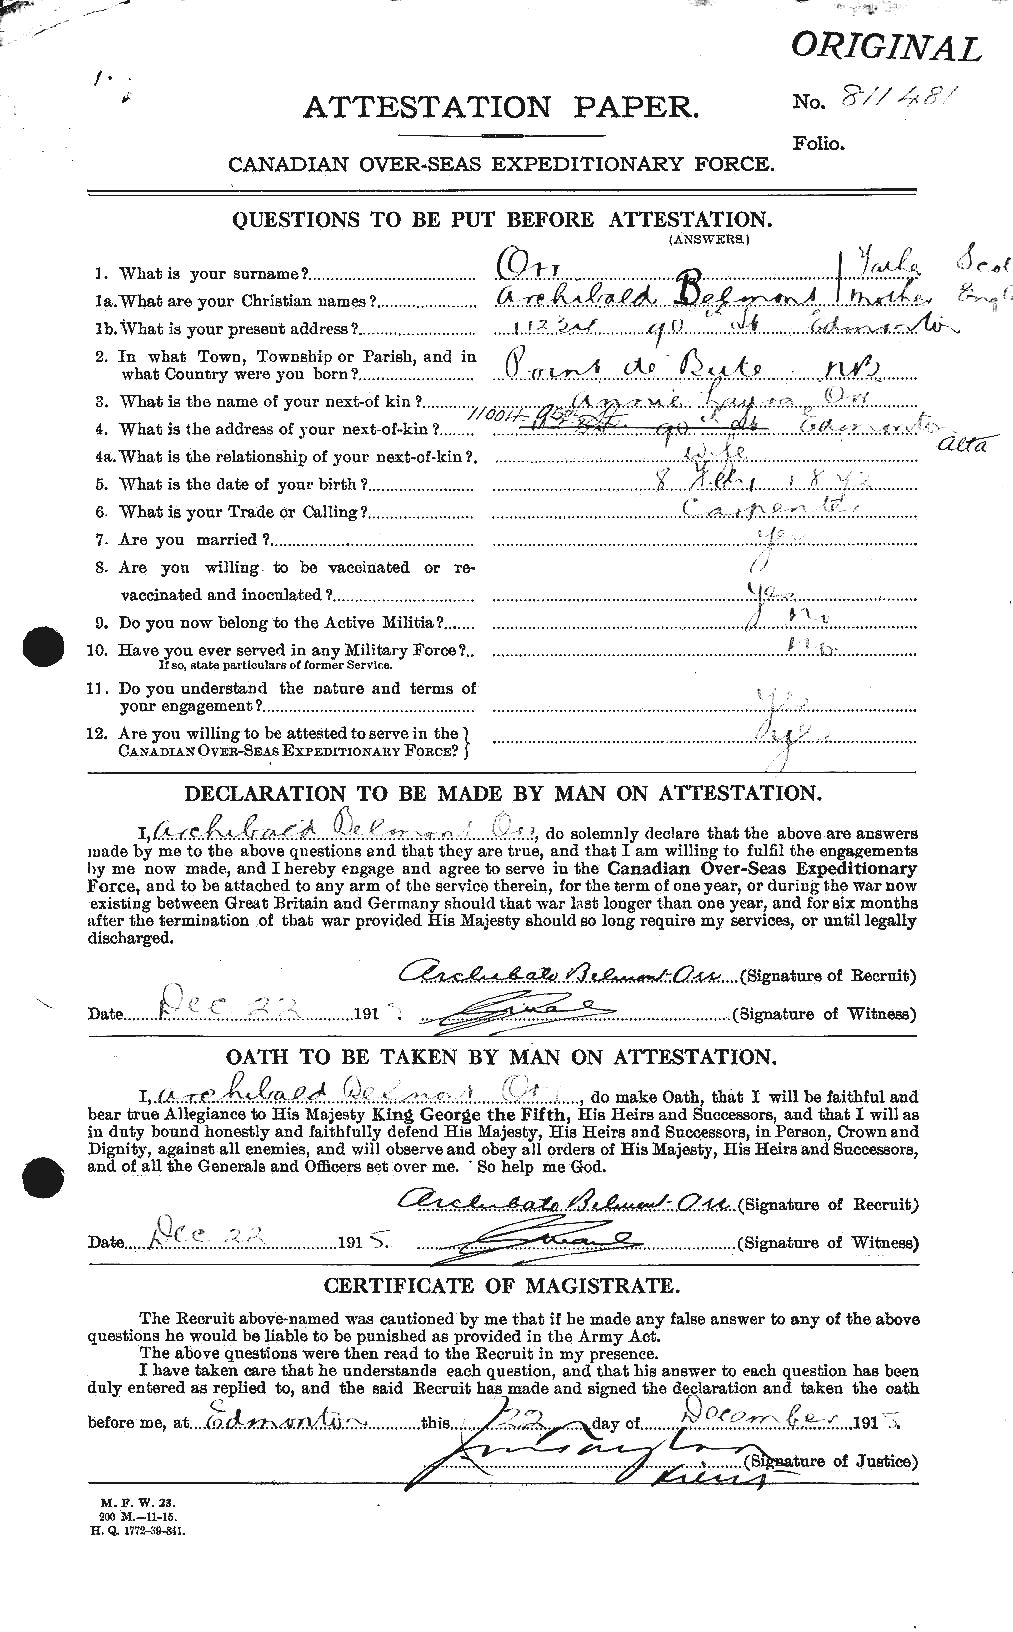 Personnel Records of the First World War - CEF 558704a